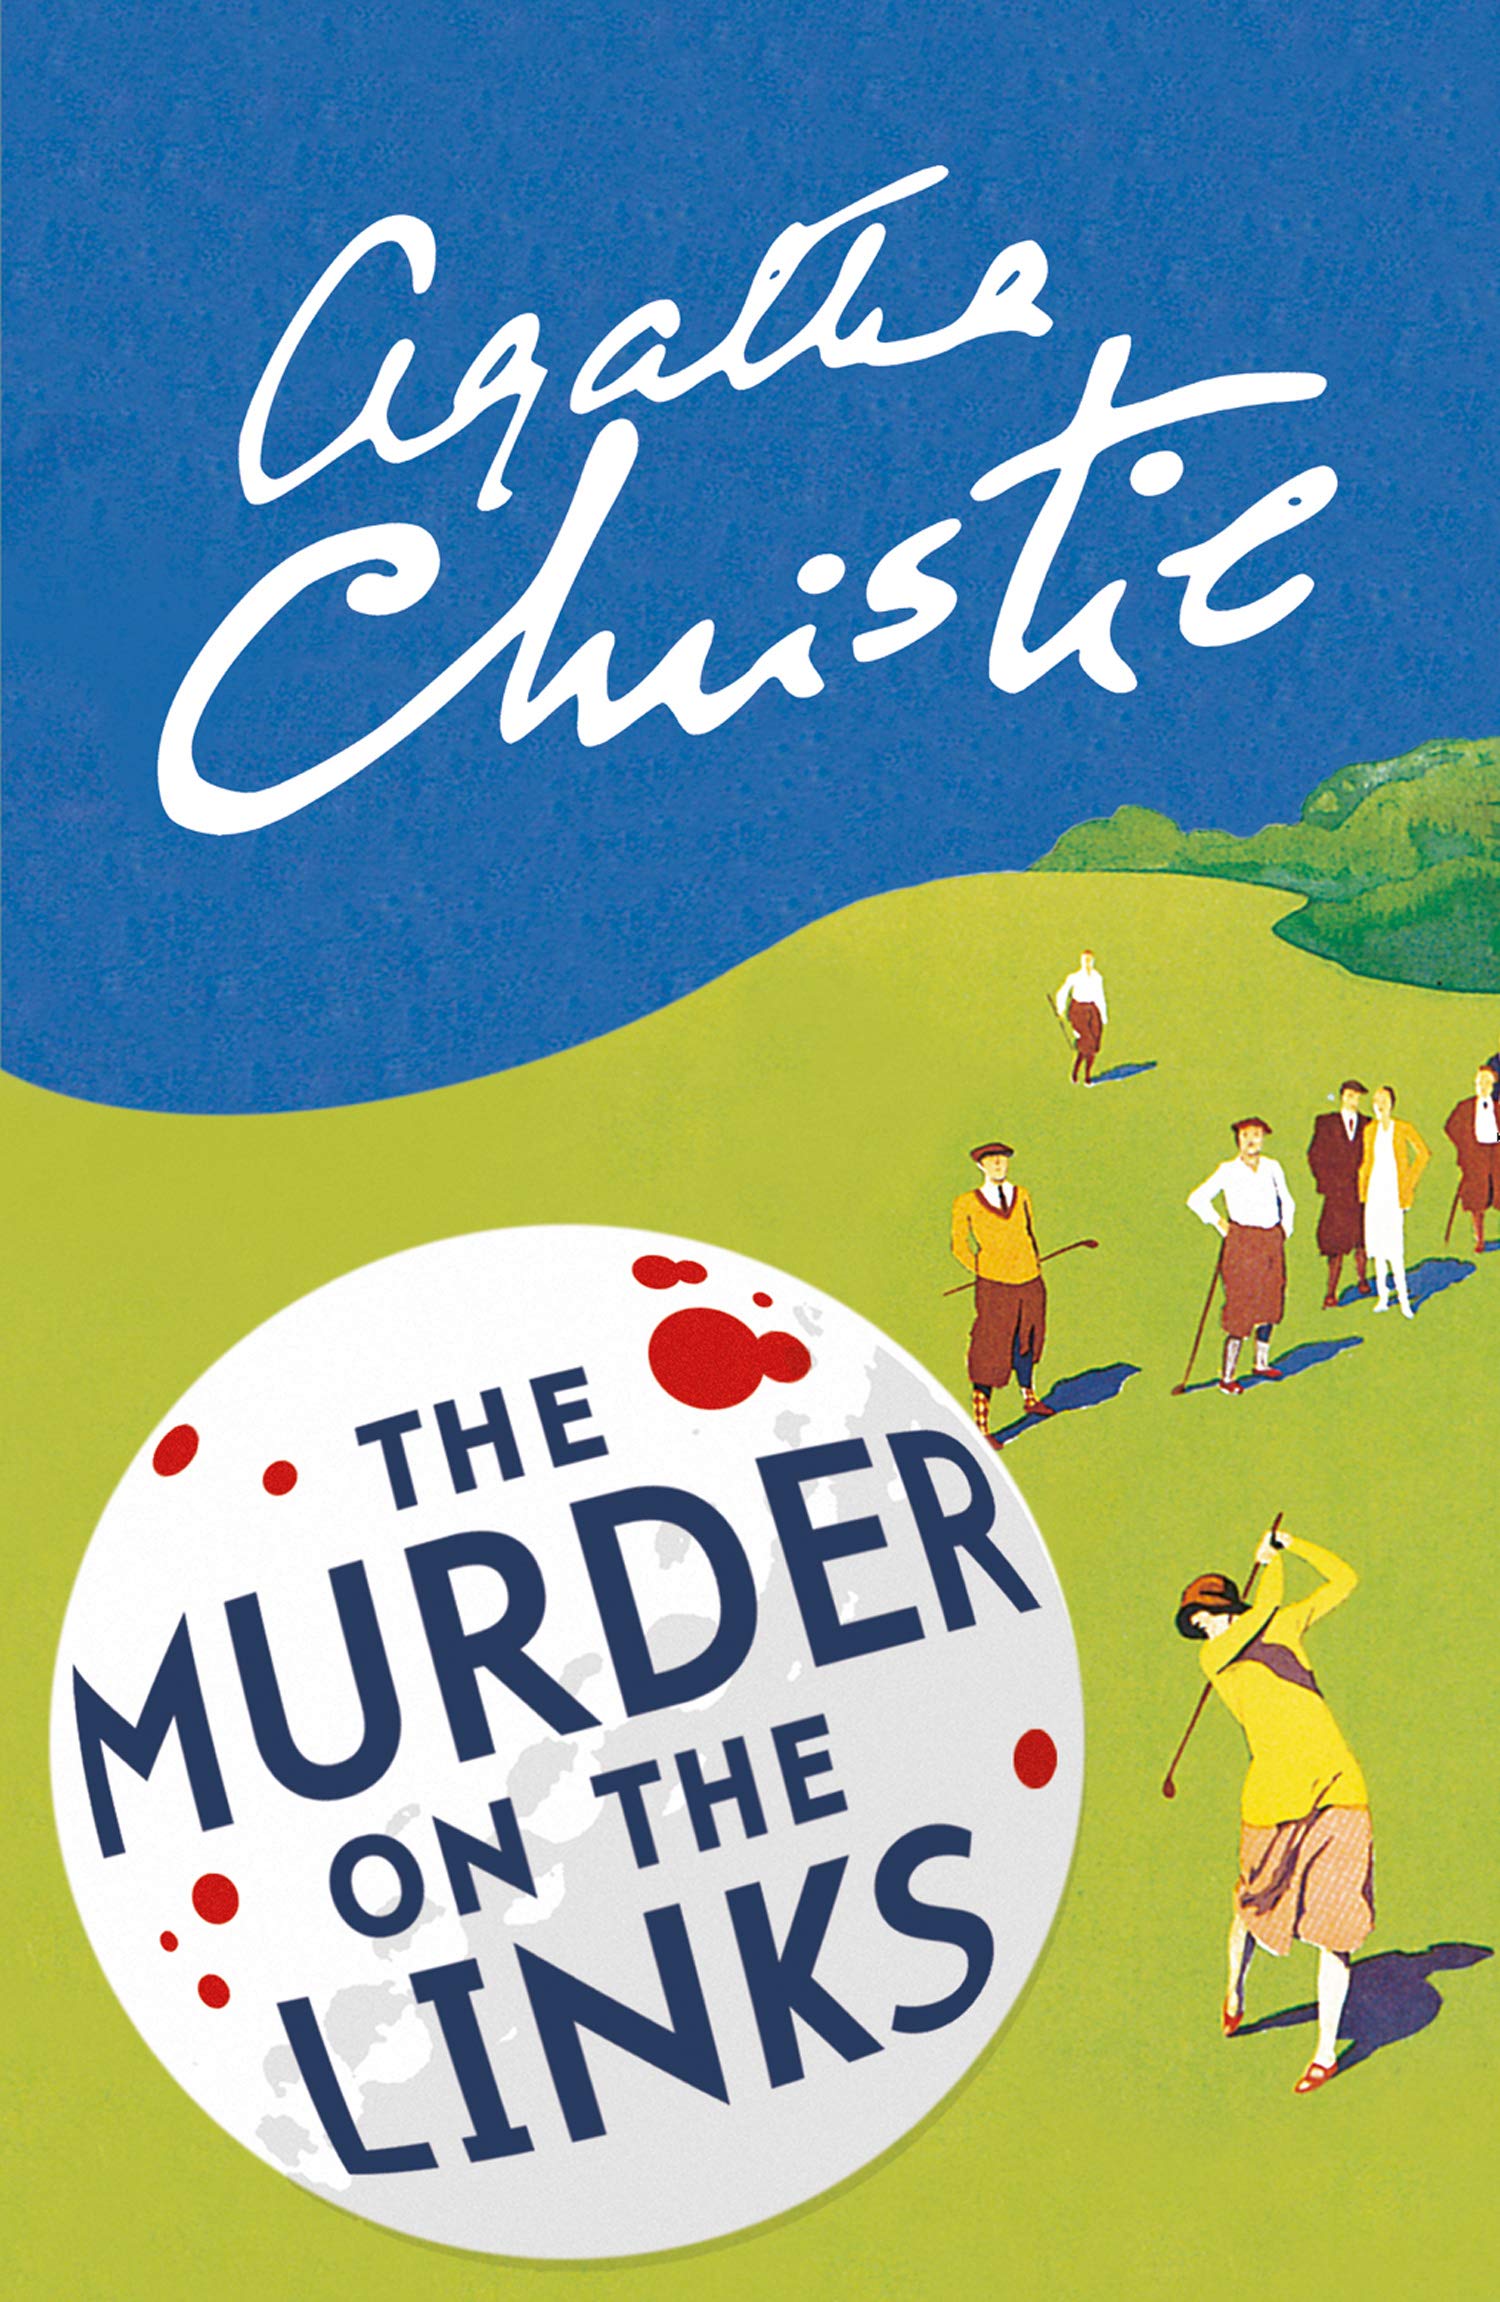 The Murder on the Links - listen book free online